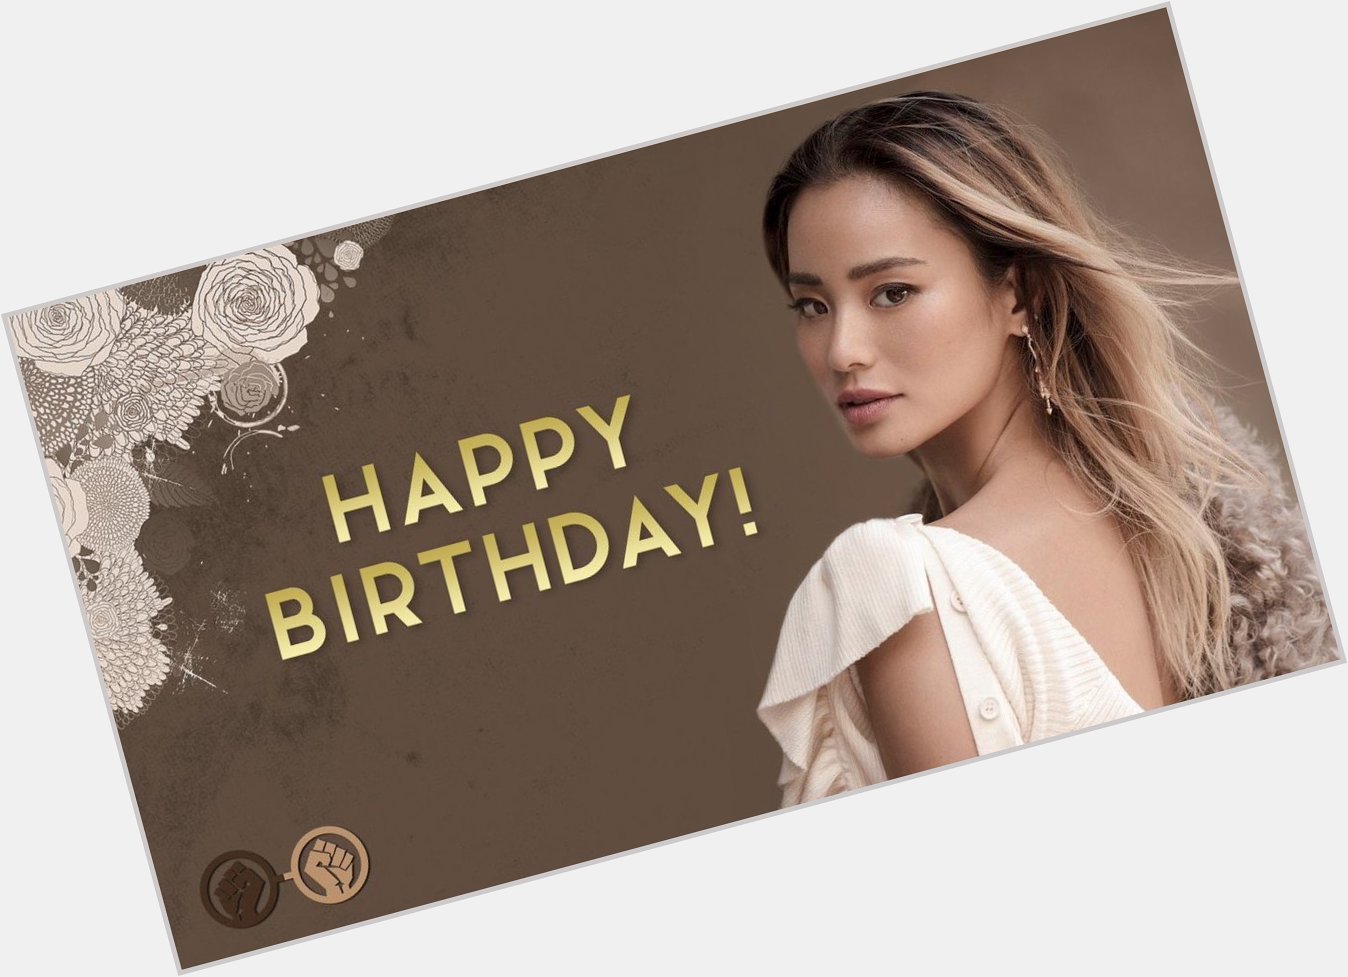 Happy Birthday, Jamie Chung! The star of Fox\s \The Gifted\ turns 35 today! 